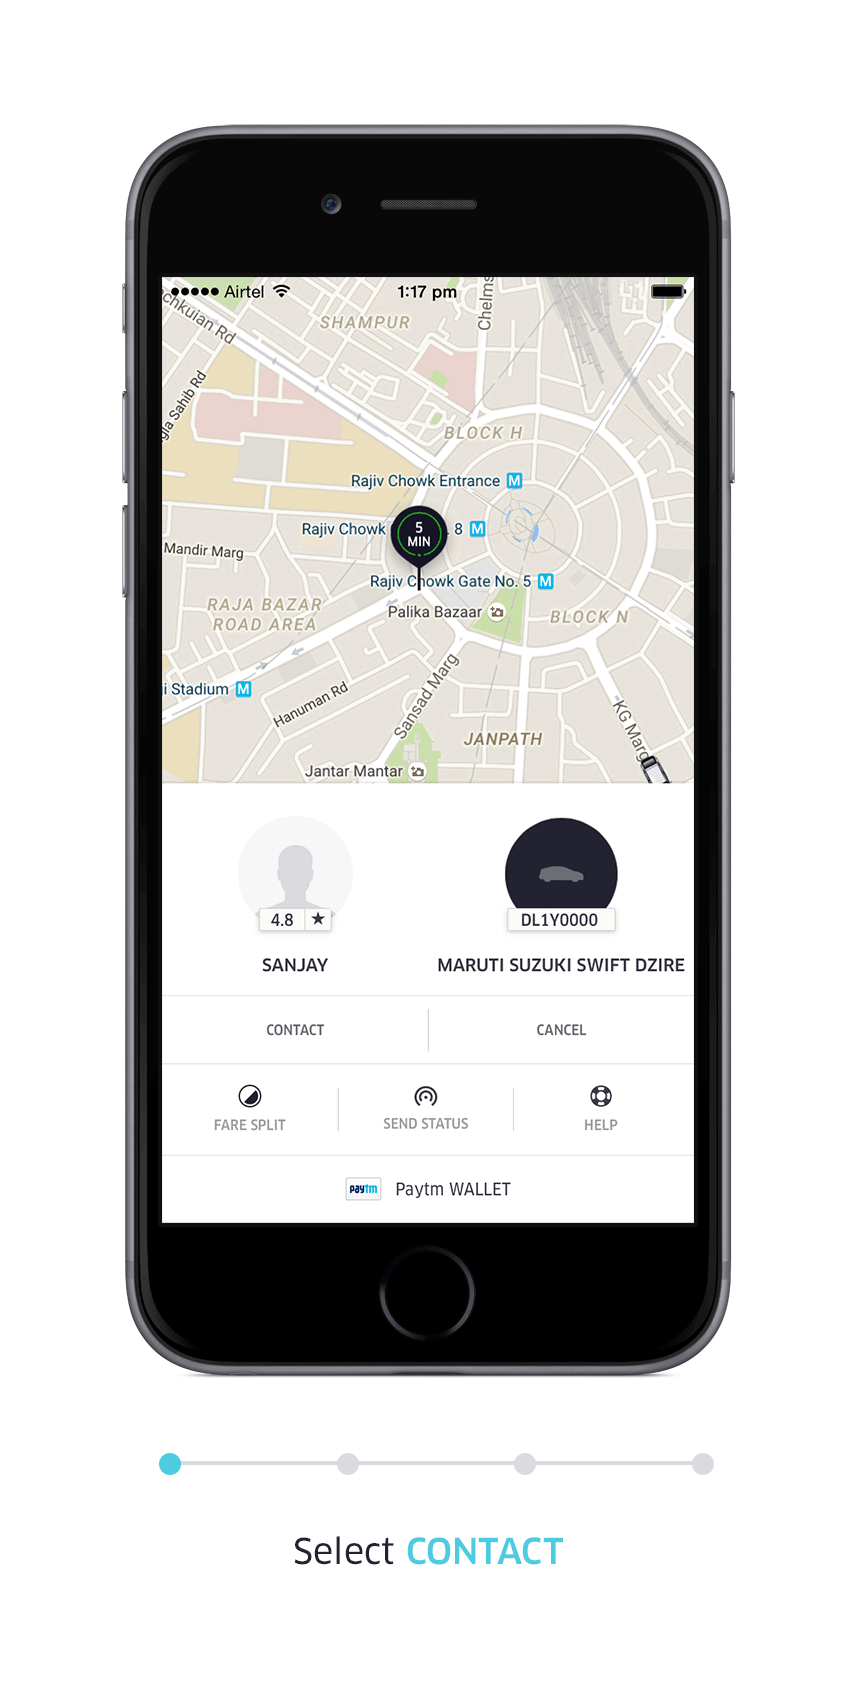 After Ola, Uber Too Brings Disguised Phone Numbers For Passenger Privacy!